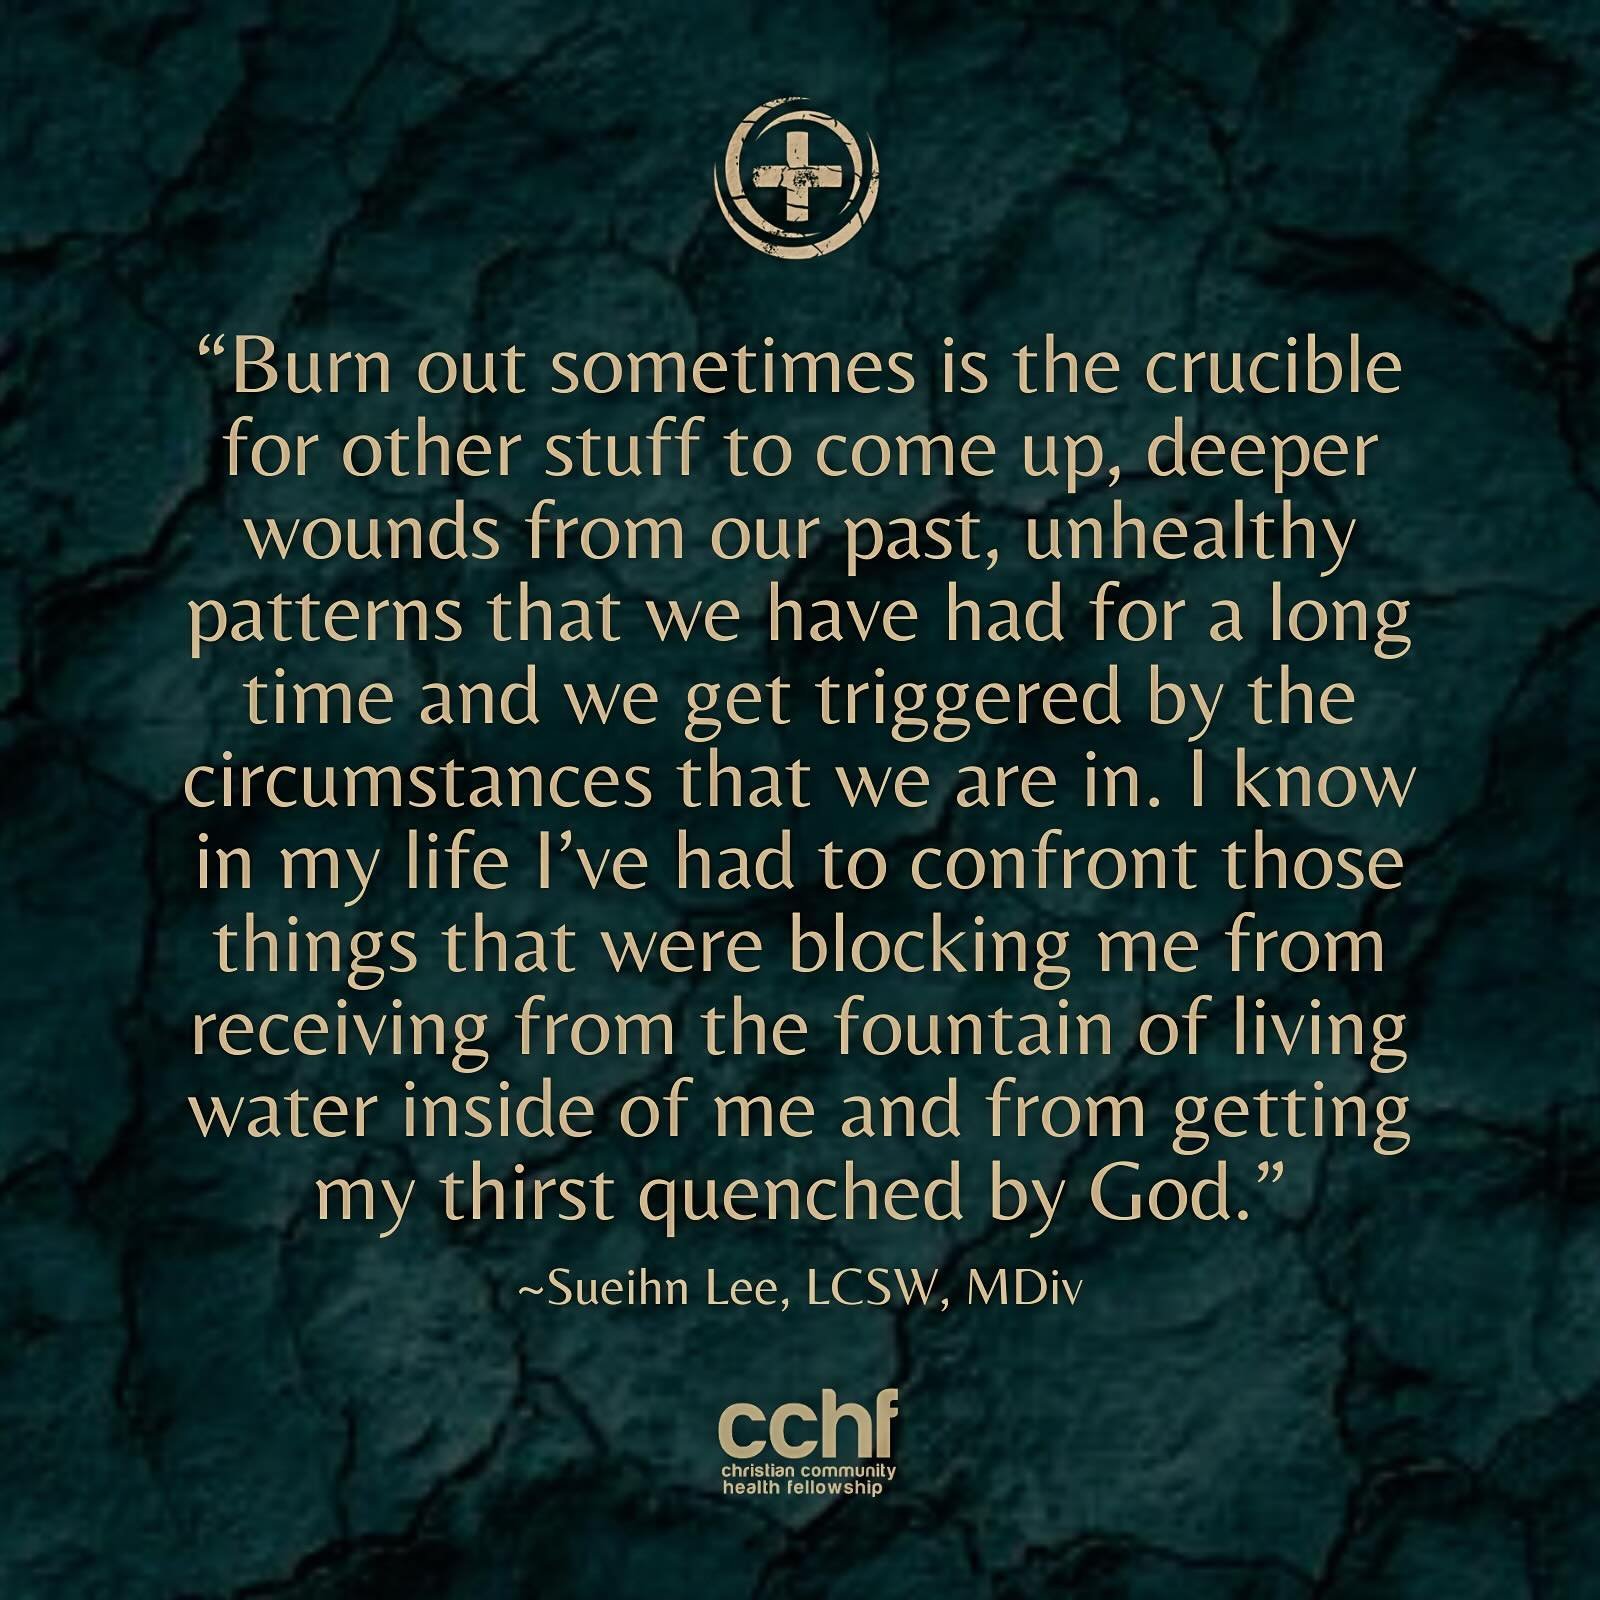 &ldquo;Burn out sometimes is the crucible for other stuff to come up, deeper wounds from our past, unhealthy patterns that we have had for a long time and we get triggered by the
circumstances that we are in.&rdquo;

~Sueihn Lee, LCSW, MDiv

#CCHF #C